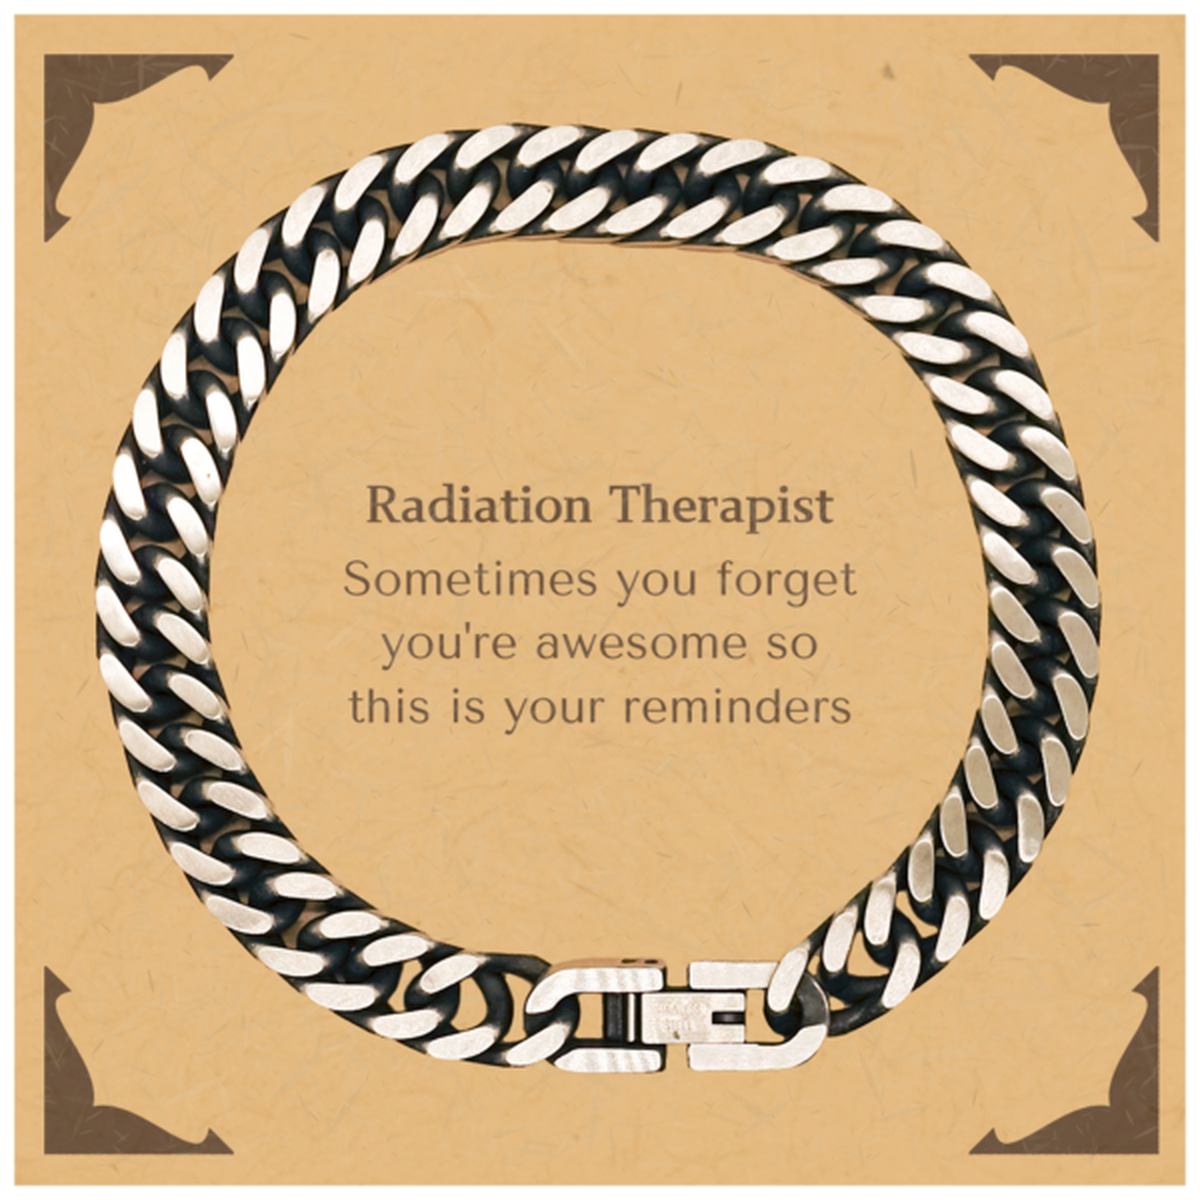 Sentimental Radiation Therapist Cuban Link Chain Bracelet, Radiation Therapist Sometimes you forget you're awesome so this is your reminders, Graduation Christmas Birthday Gifts for Radiation Therapist, Men, Women, Coworkers